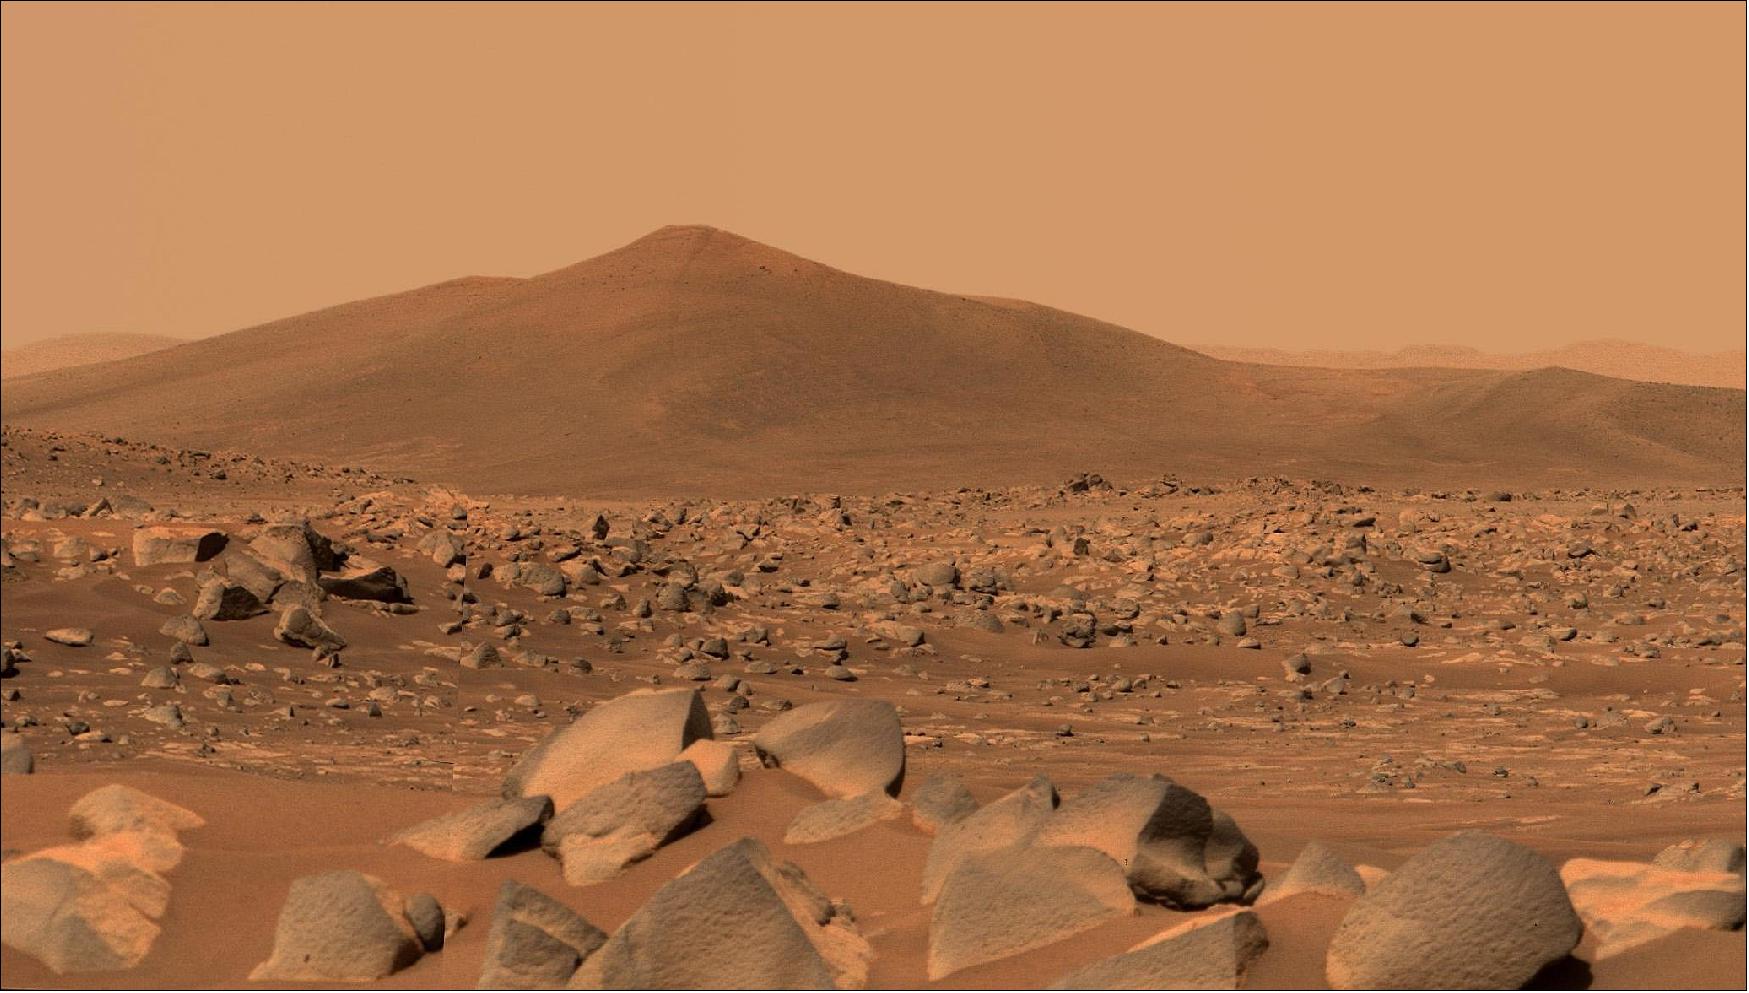 Figure 28: NASA's Perseverance Mars rover used its dual-camera Mastcam-Z imager to capture this image of "Santa Cruz," a hill about 1.5 miles (2.5 kilometers) away from the rover, on April 29, 2021, the 68th Martian day, or sol, of the mission. The entire scene is inside of Mars' Jezero Crater; the crater's rim can be seen on the horizon line beyond the hill. This scene is not white balanced; instead, it is displayed in a preliminary calibrated version of a natural-color composite, approximately simulating the colors of the scene as it would appear to a person on Mars. Arizona State University in Tempe leads the operations of the Mastcam-Z instrument, working in collaboration with Malin Space Science Systems in San Diego (image credit: NASA/JPL-Caltech/ASU/MSSS)